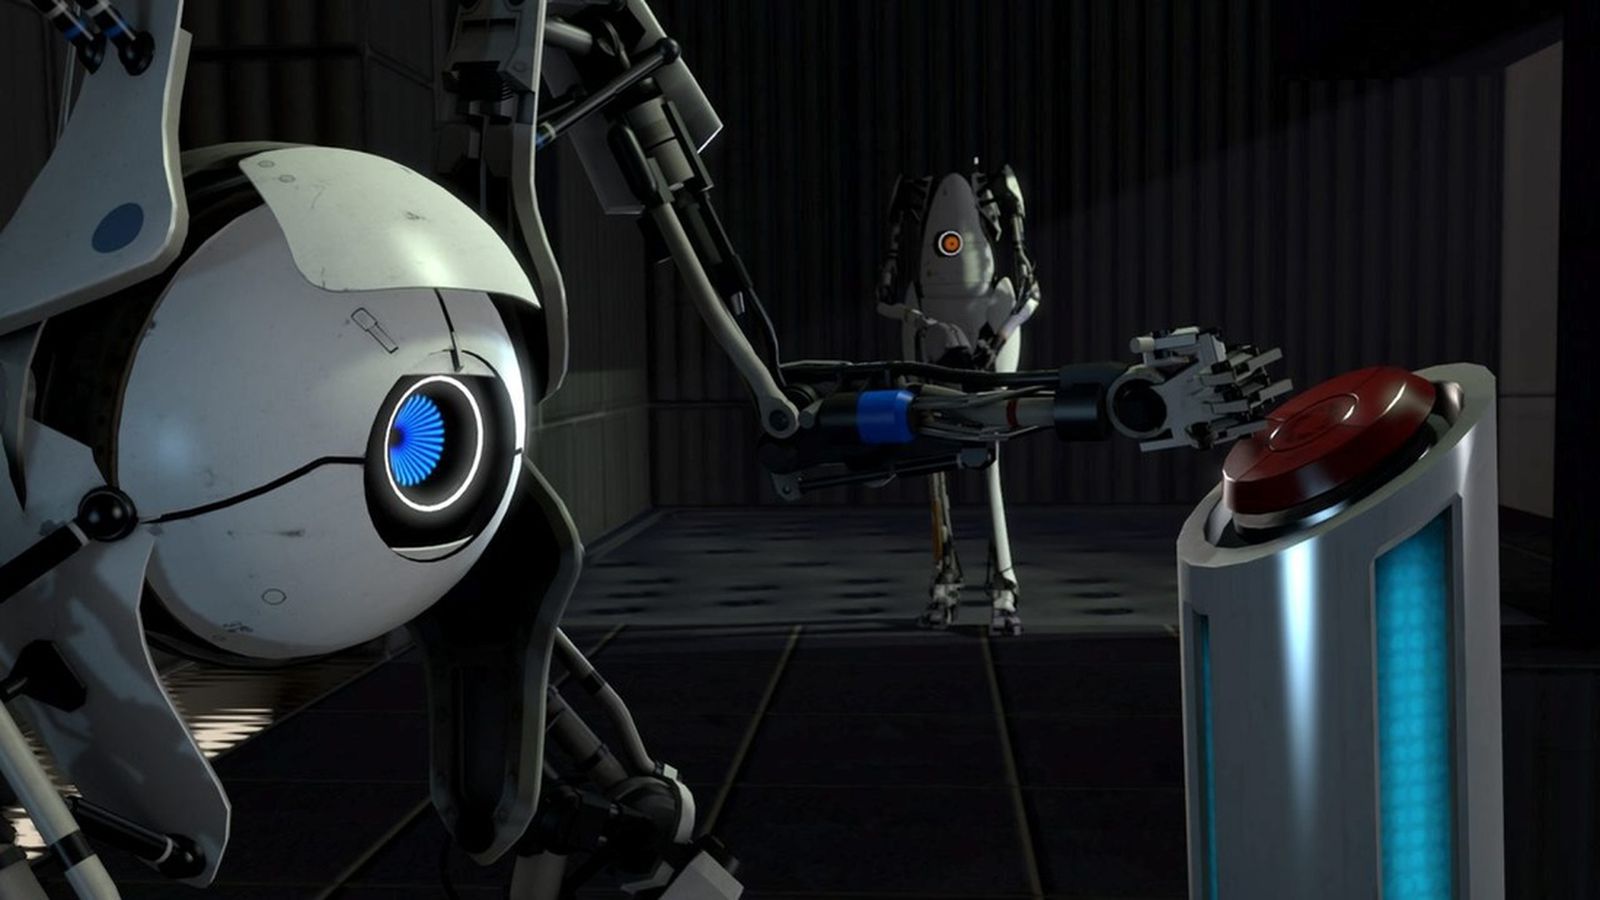 Portal 2 on Steam adds split-screen to co-op mode, Big Picture support